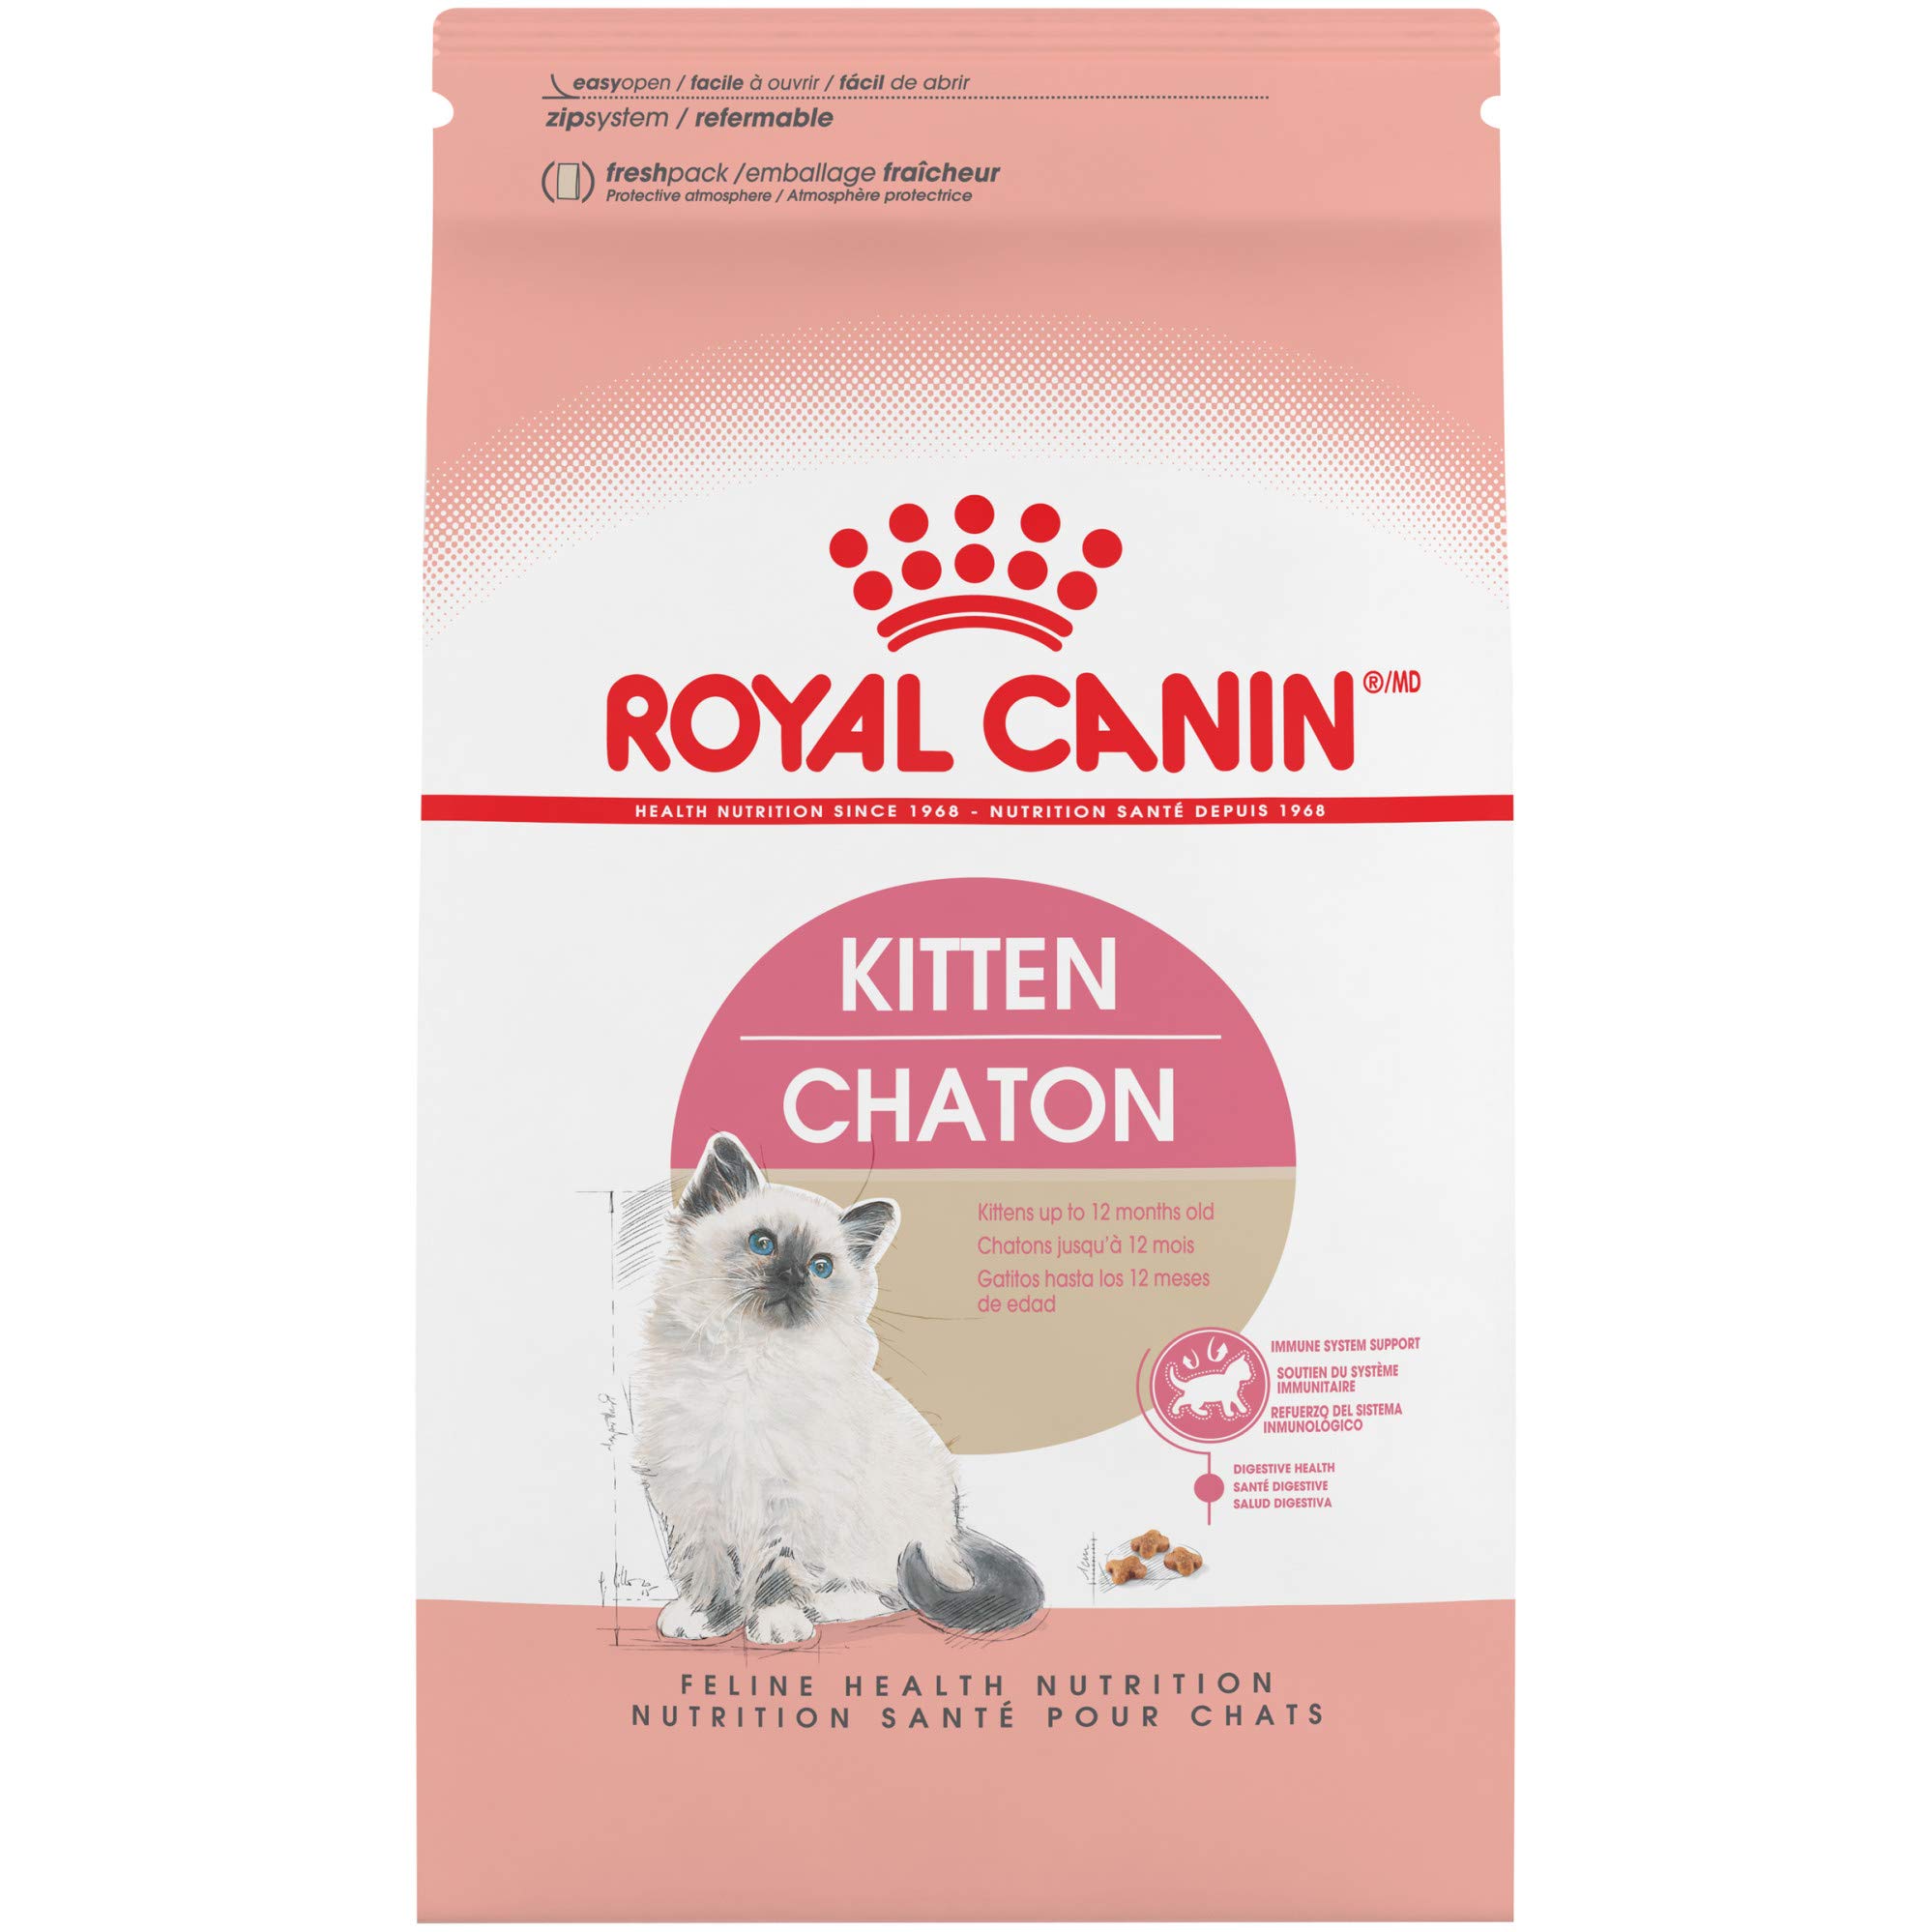 Royal Canin Feline Health Nutrition Dry Food for Young Kittens, 7 lb bag